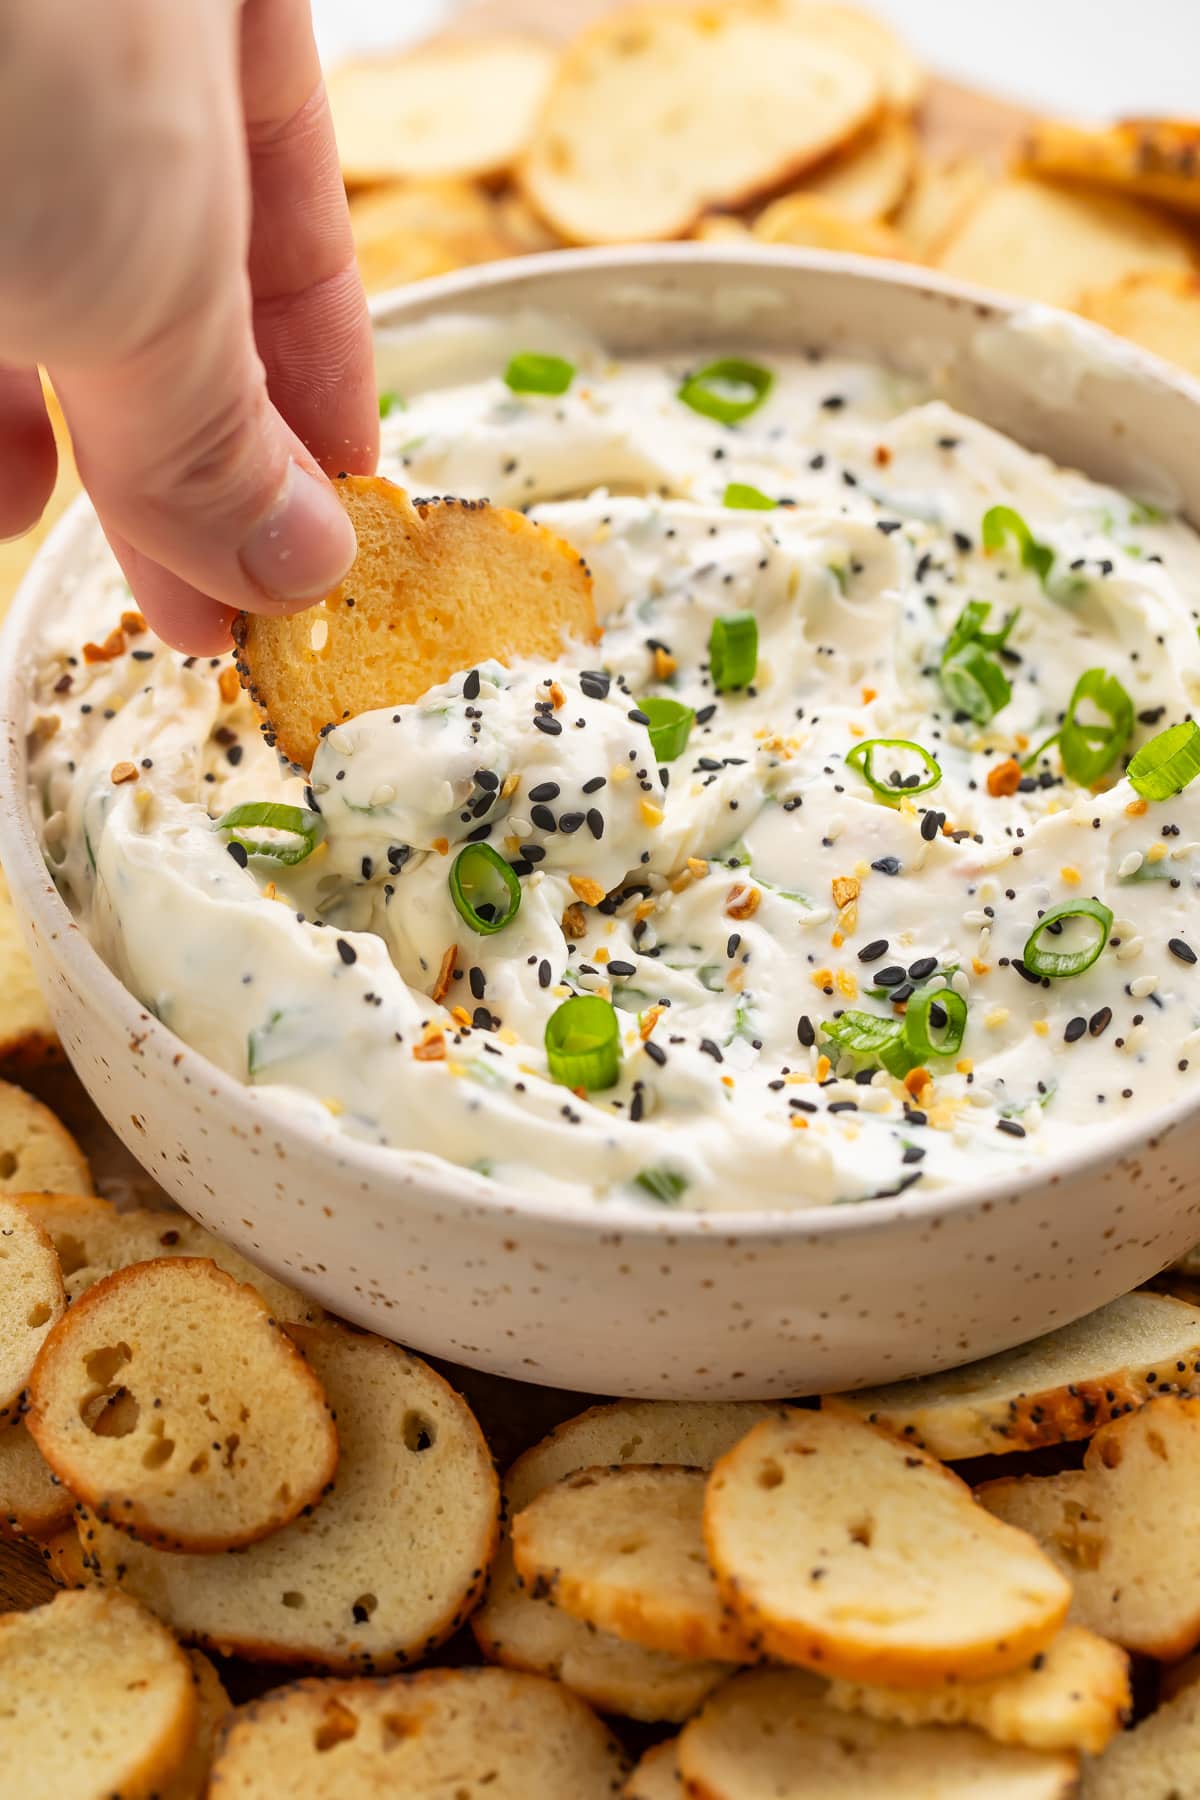 A white woman's hand dipping a bagel chip into a bowl of Everything Bagel dip surrounded by other bagel chips.